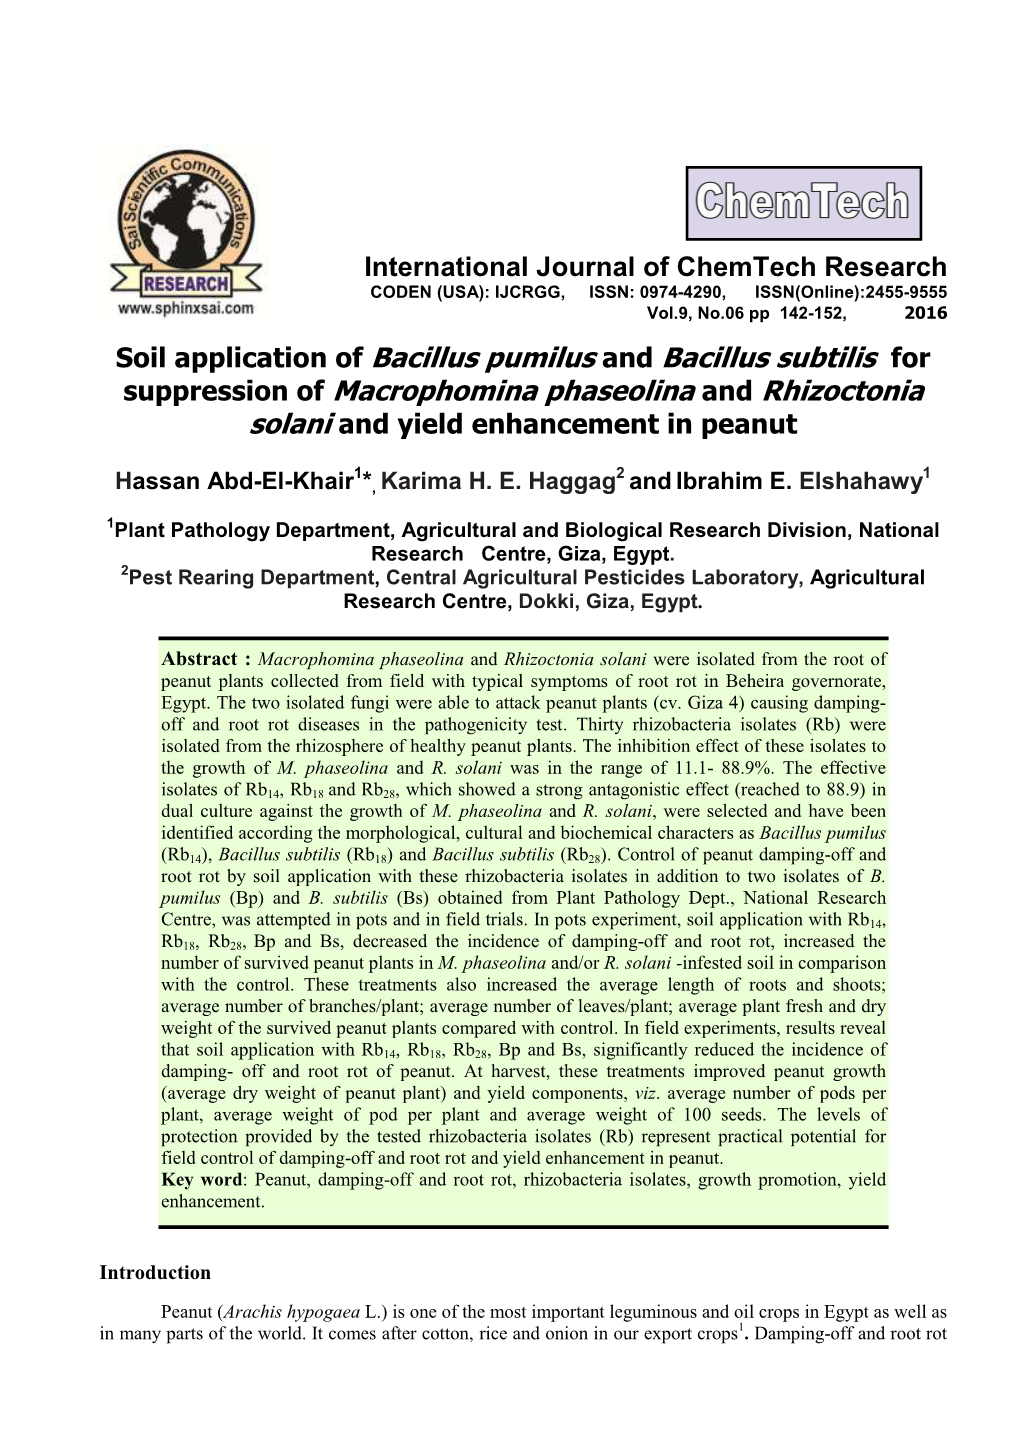 Suppression of Macrophomina Phaseolina and Rhizoctonia Solani and Yield Enhancement in Peanut